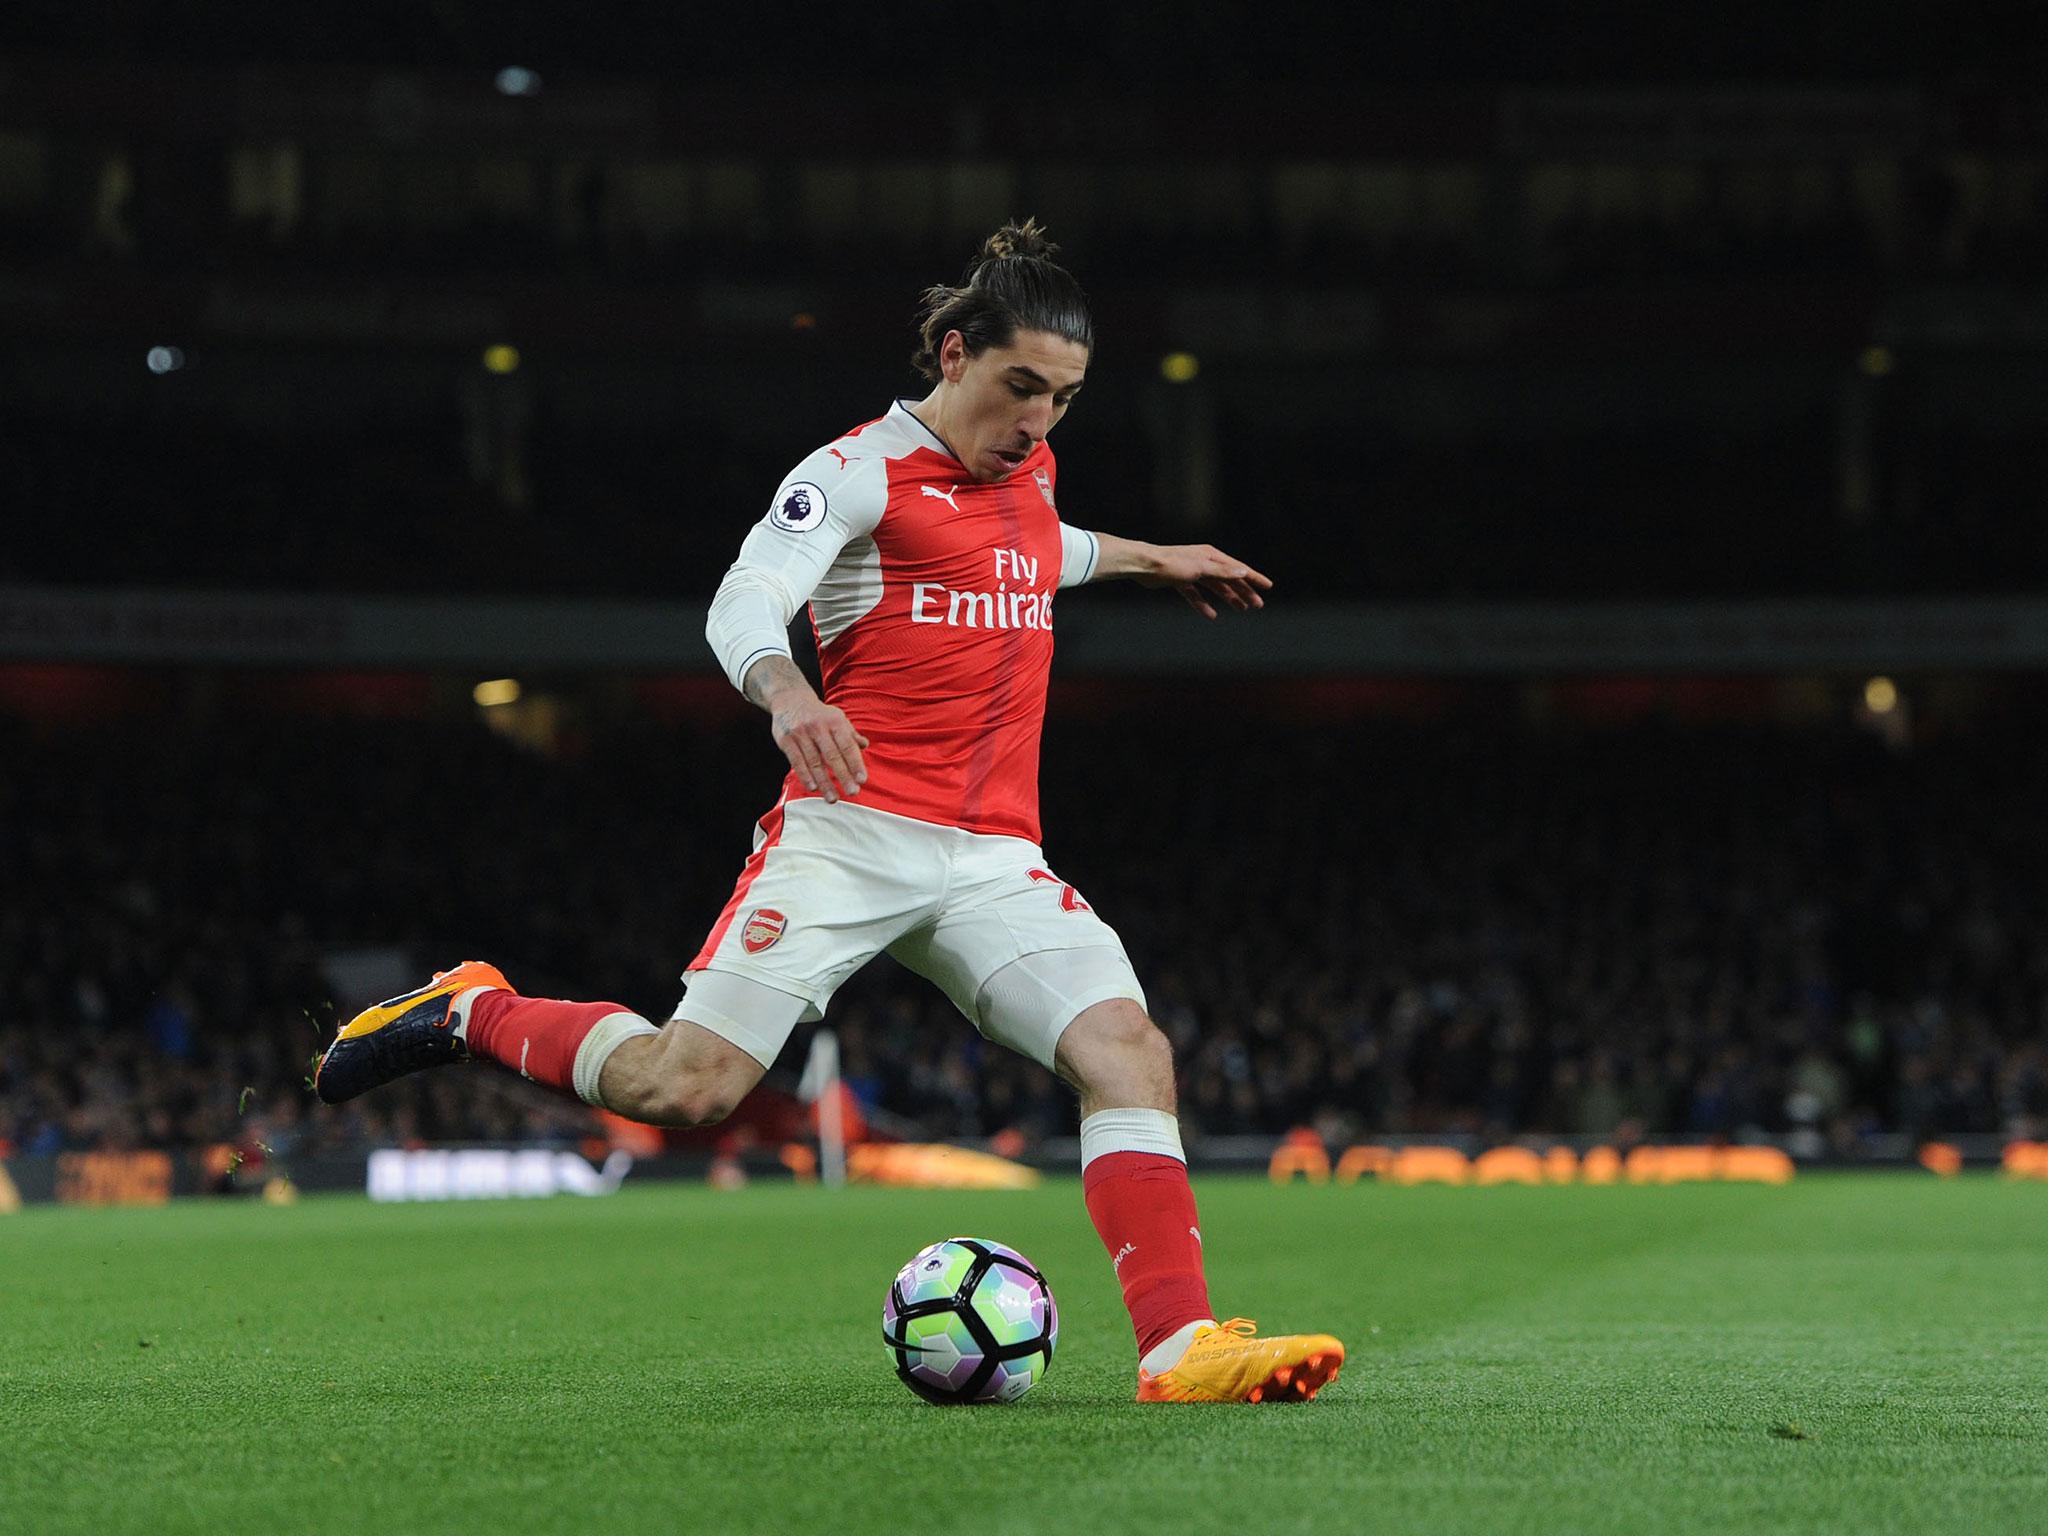 Bellerin returned to the Arsenal starting XI after being benched for the last two games